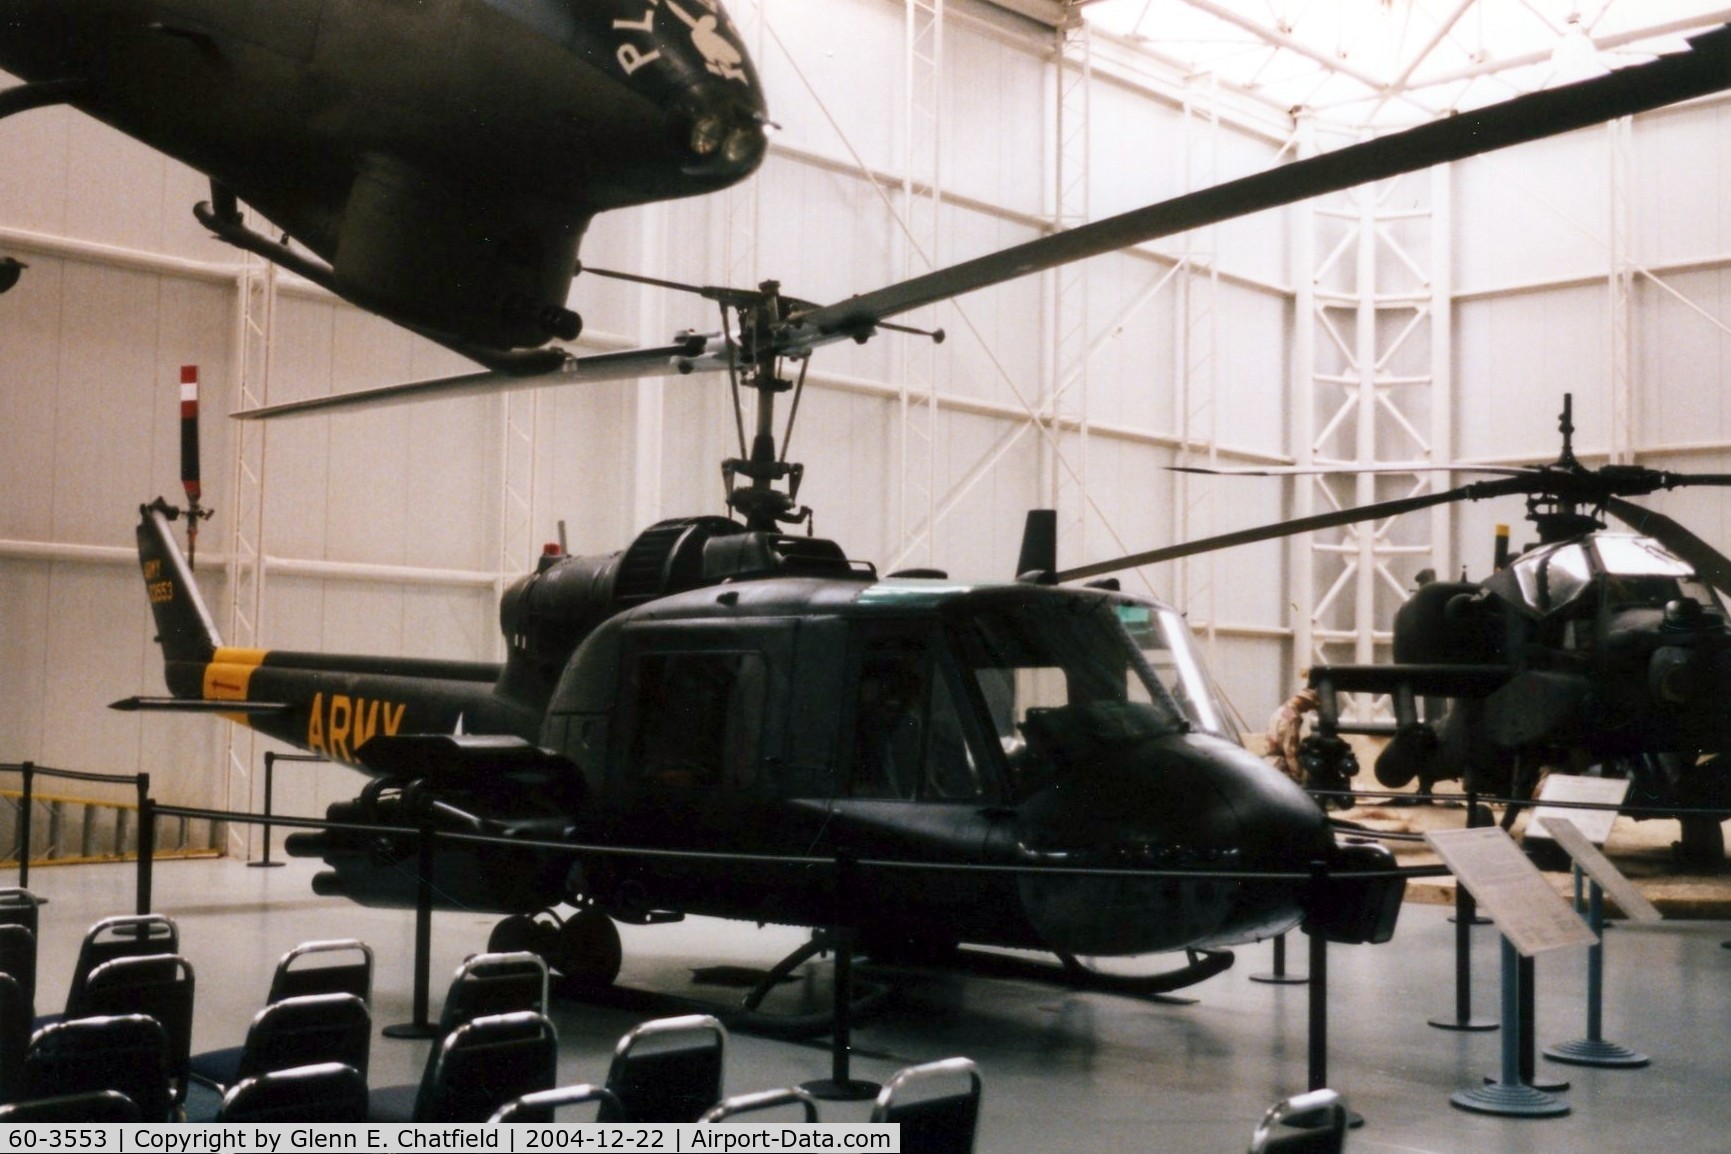 60-3553, 1960 Bell UH-1B Iroquois C/N 199, UH-1B at the Army Aviation Museum